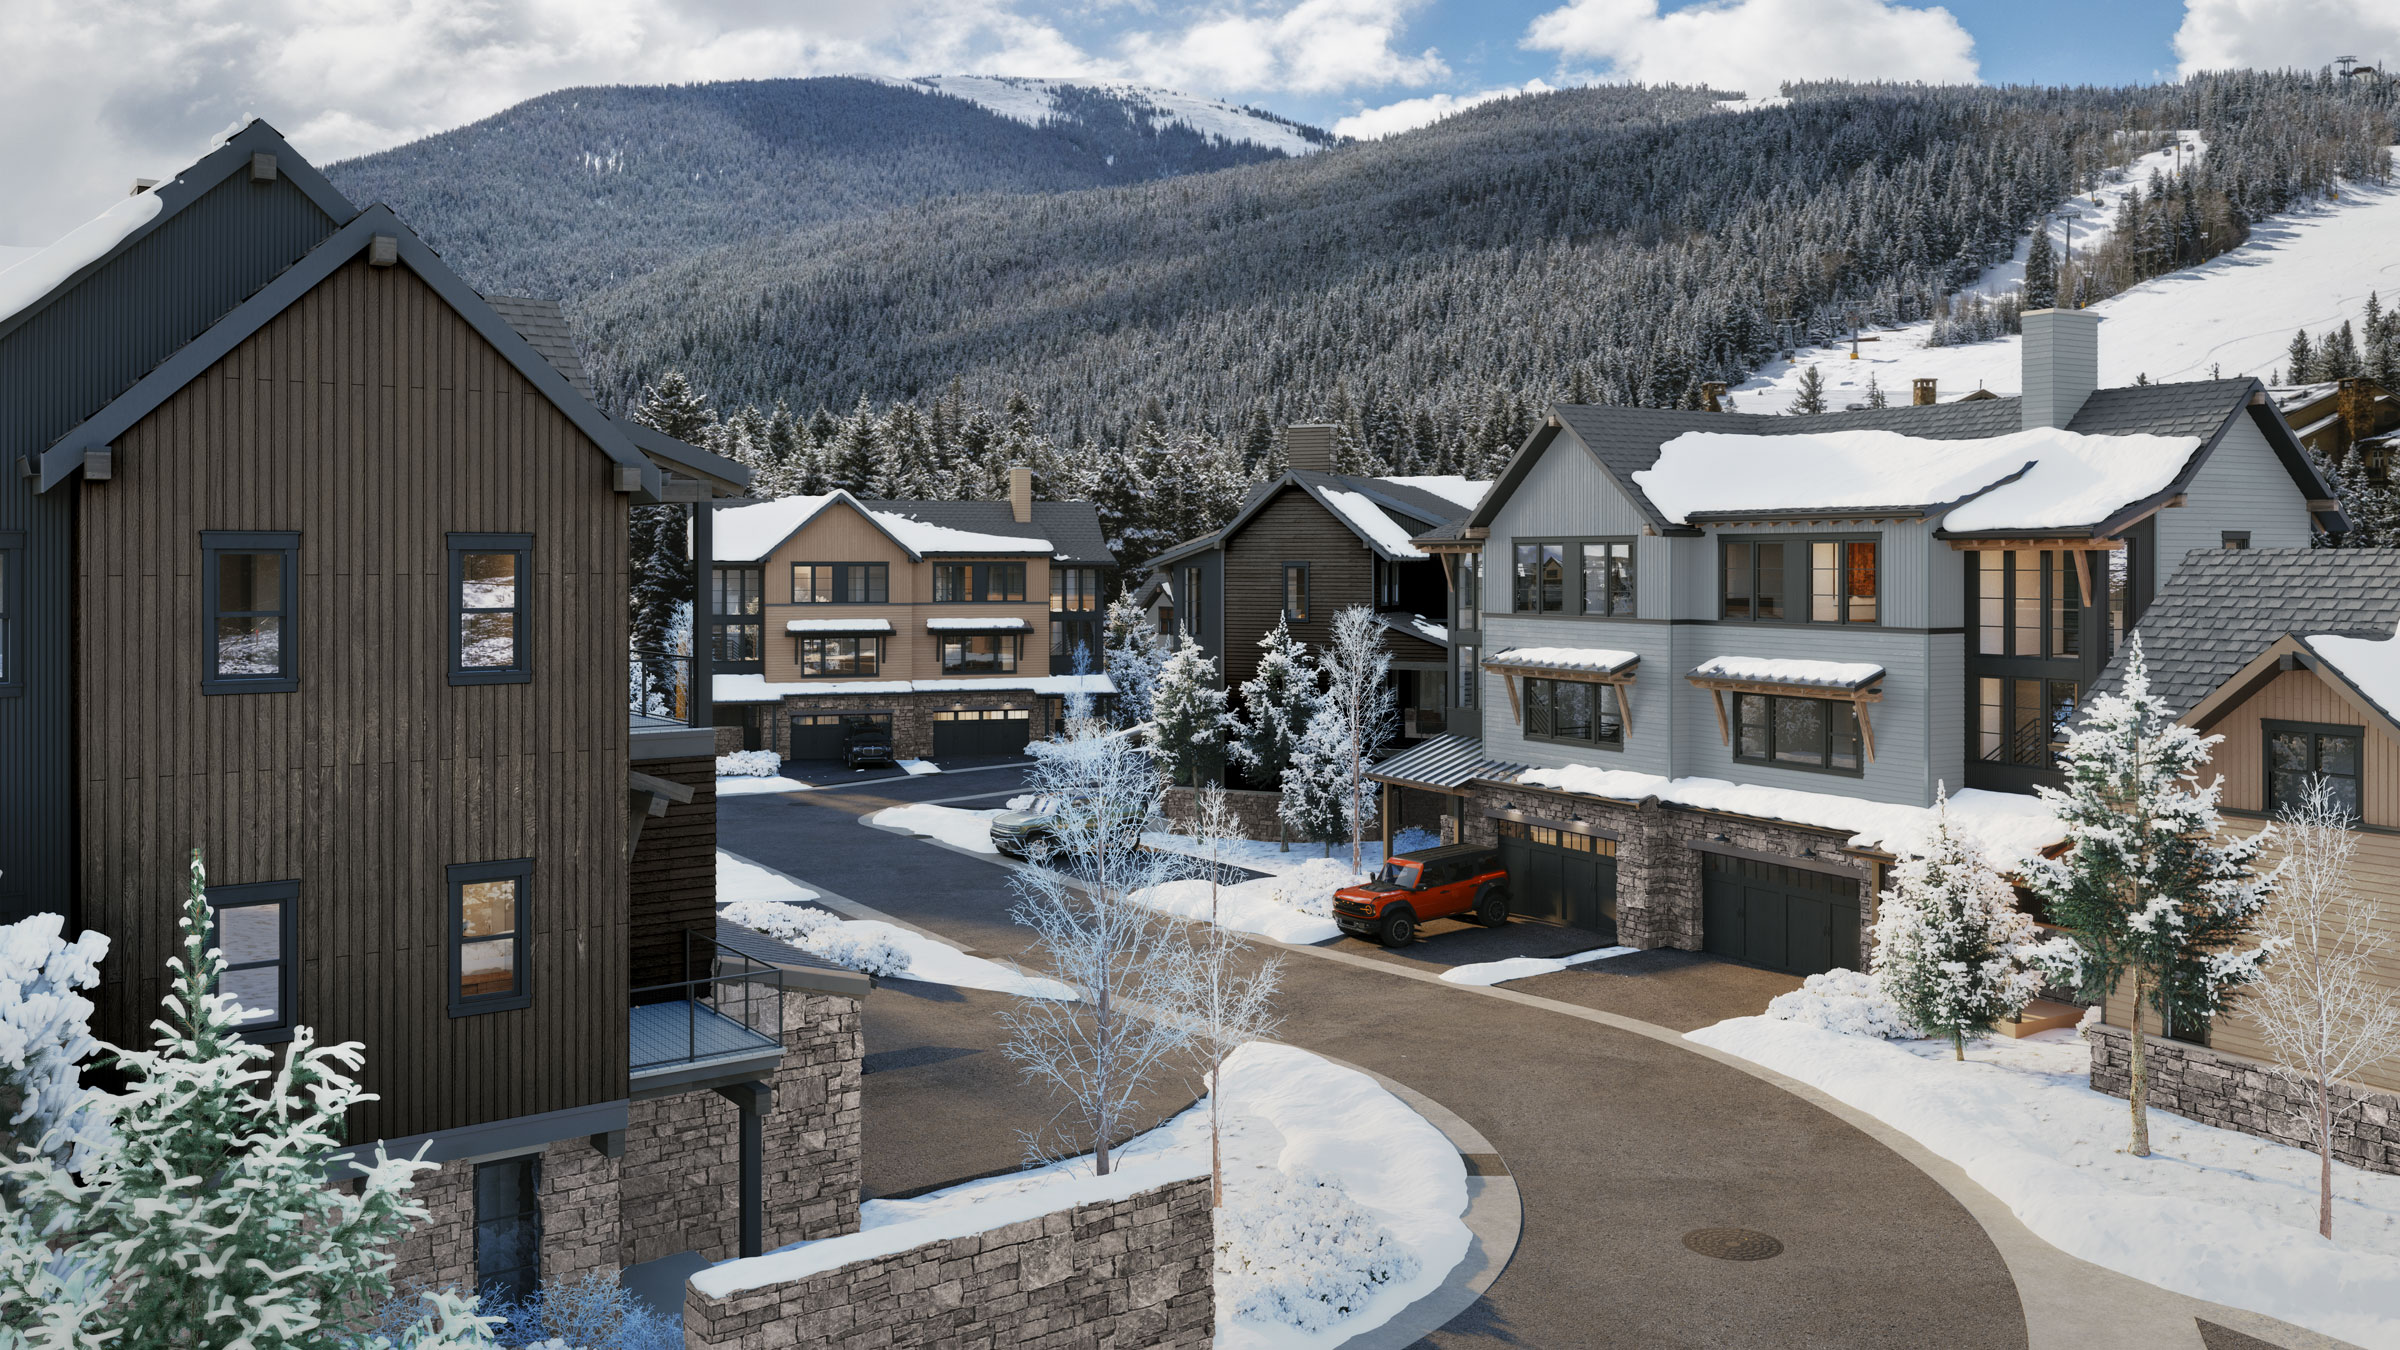 Alcove is a peaceful retreat just moments from ski lifts and the village center.